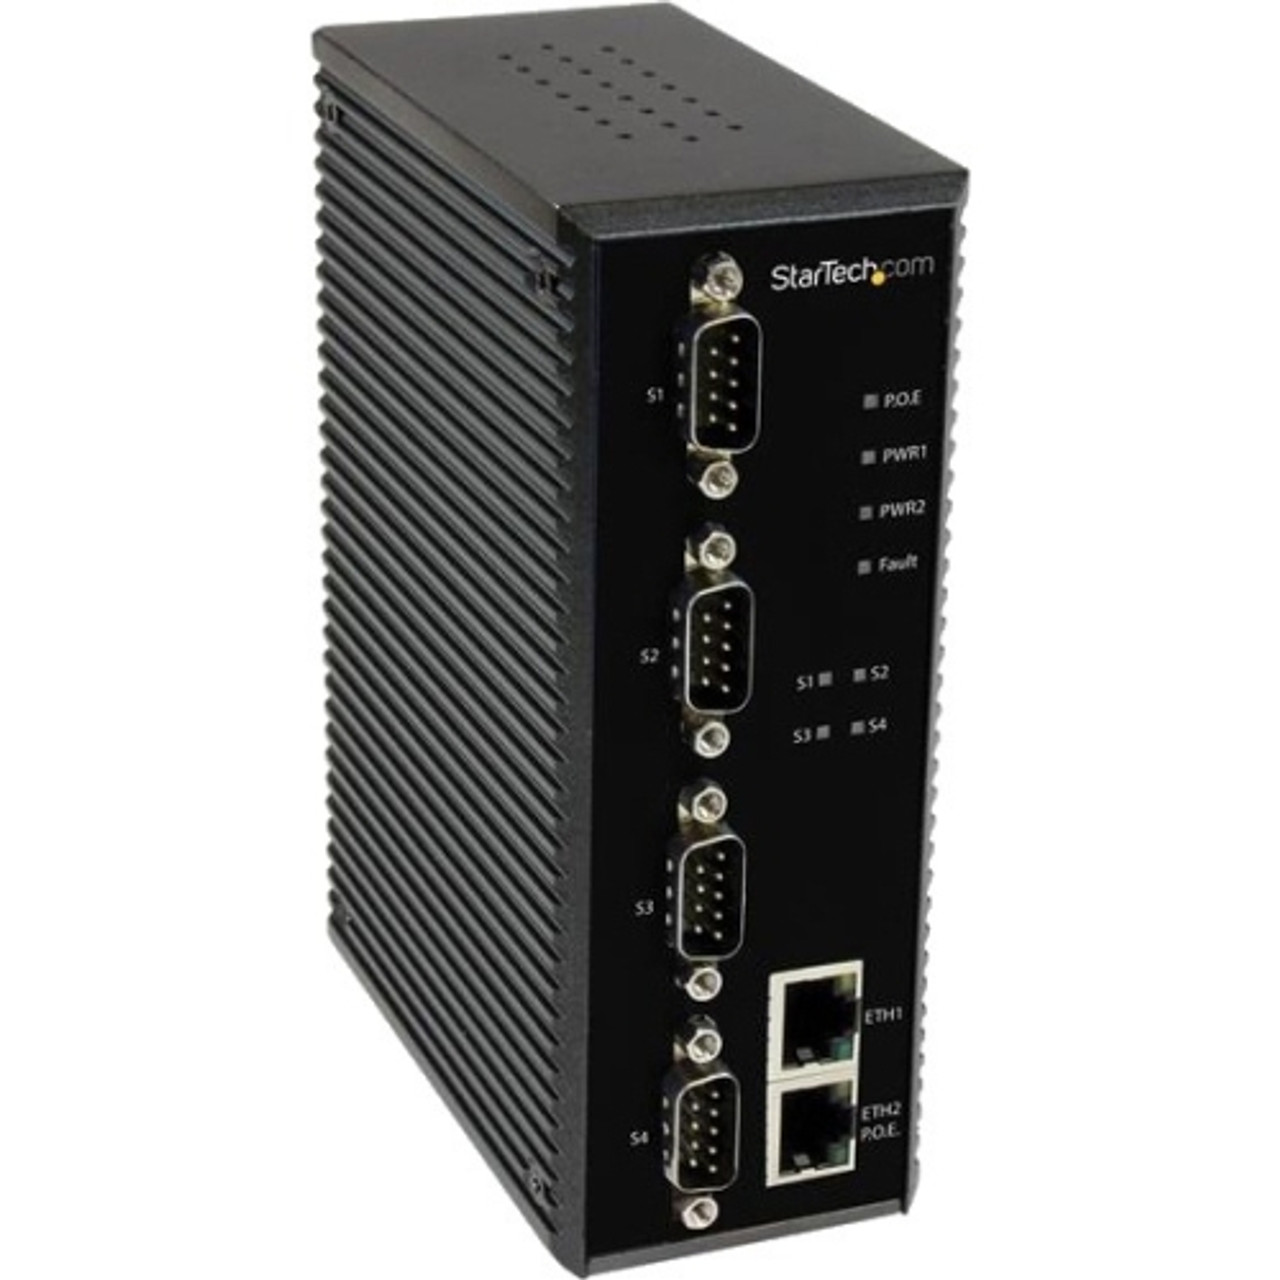 NETRS42348PD StarTech Quad Port Serial Ethernet Device Server with PoE